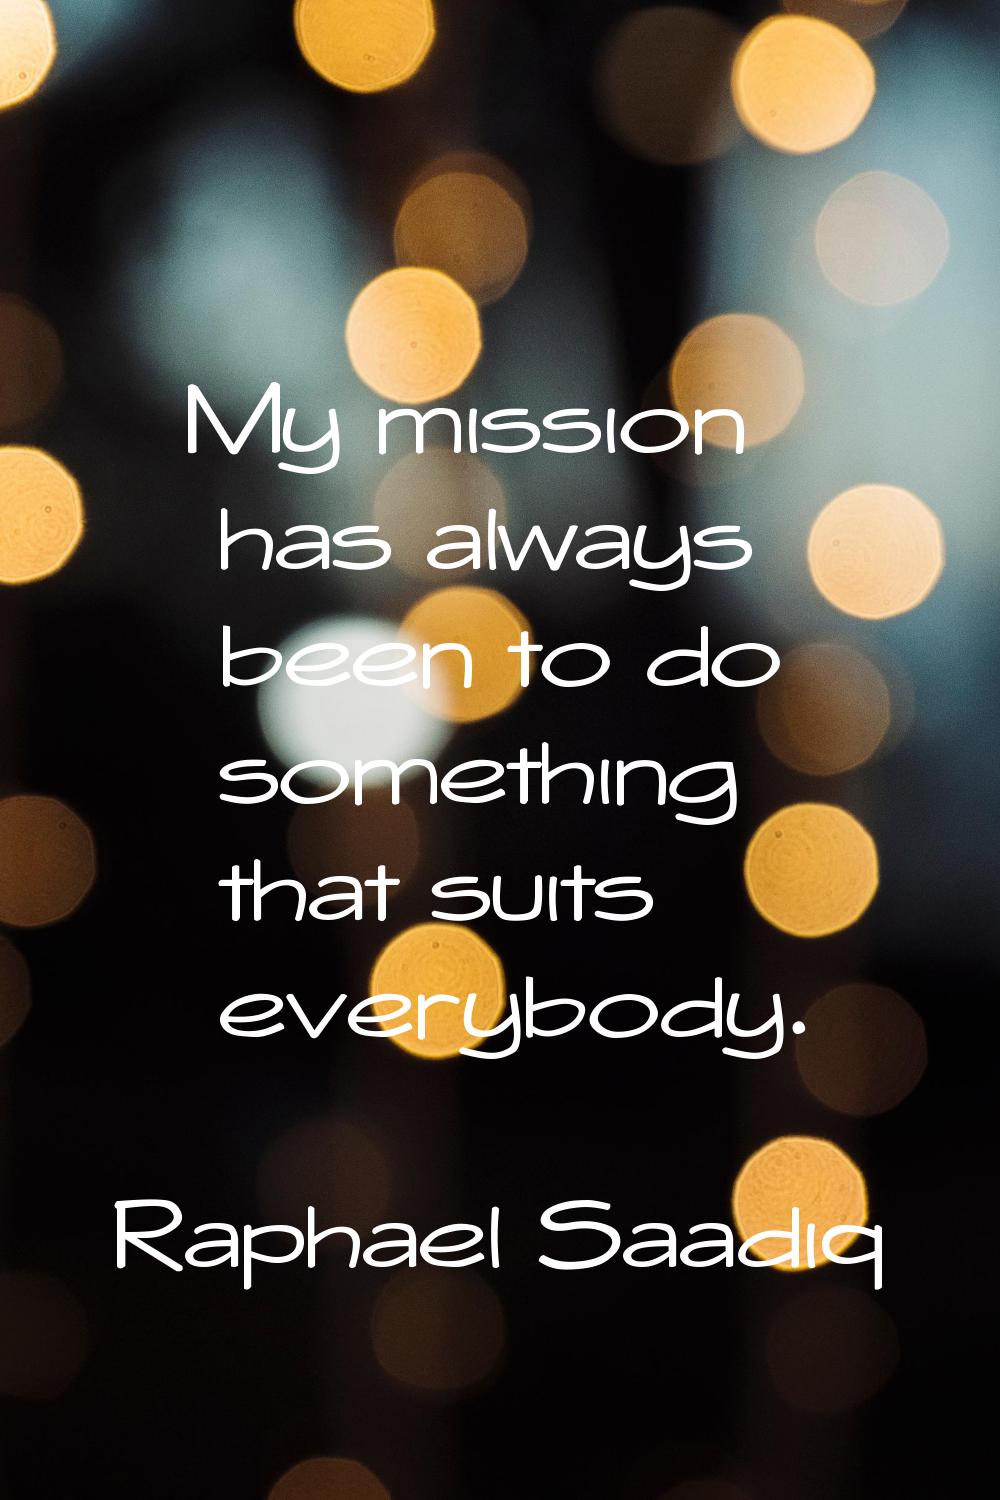 My mission has always been to do something that suits everybody.